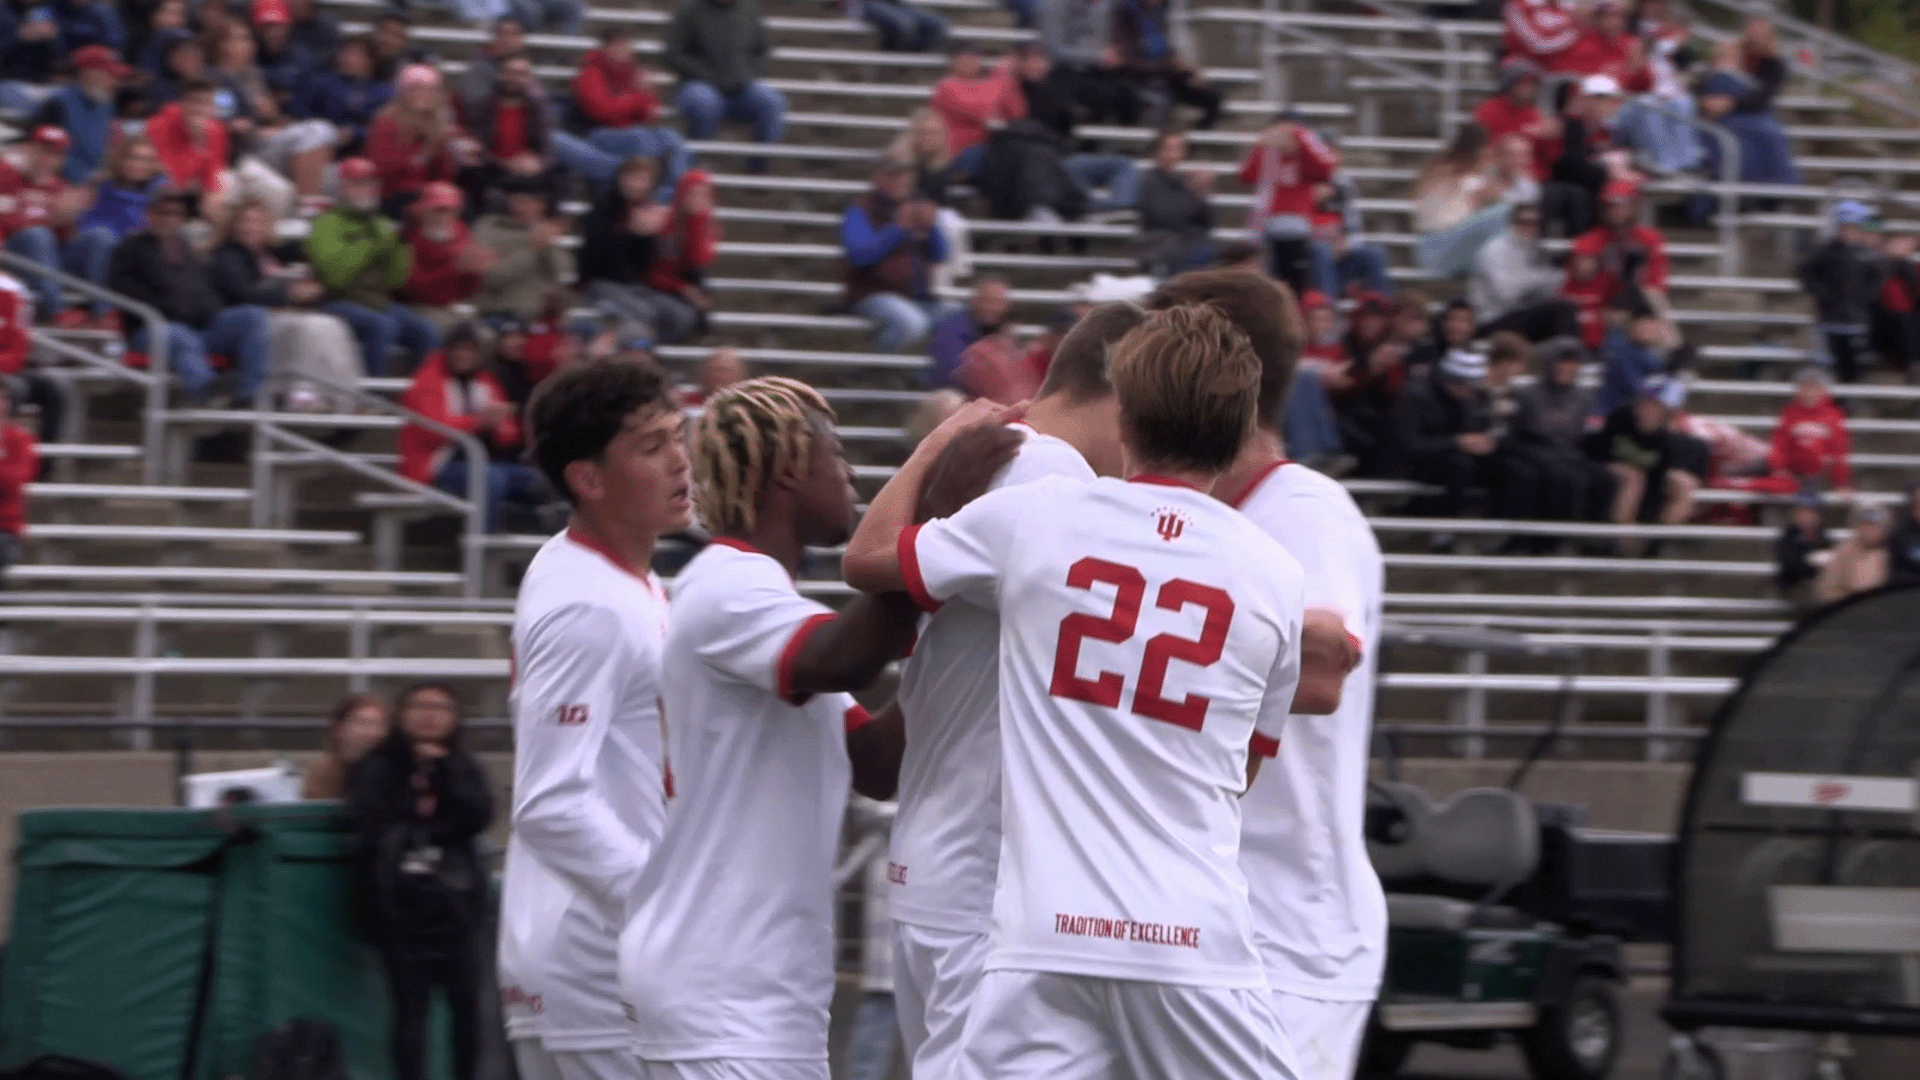 Indiana men’s soccer extends win streak with 2-1 win over Ohio State